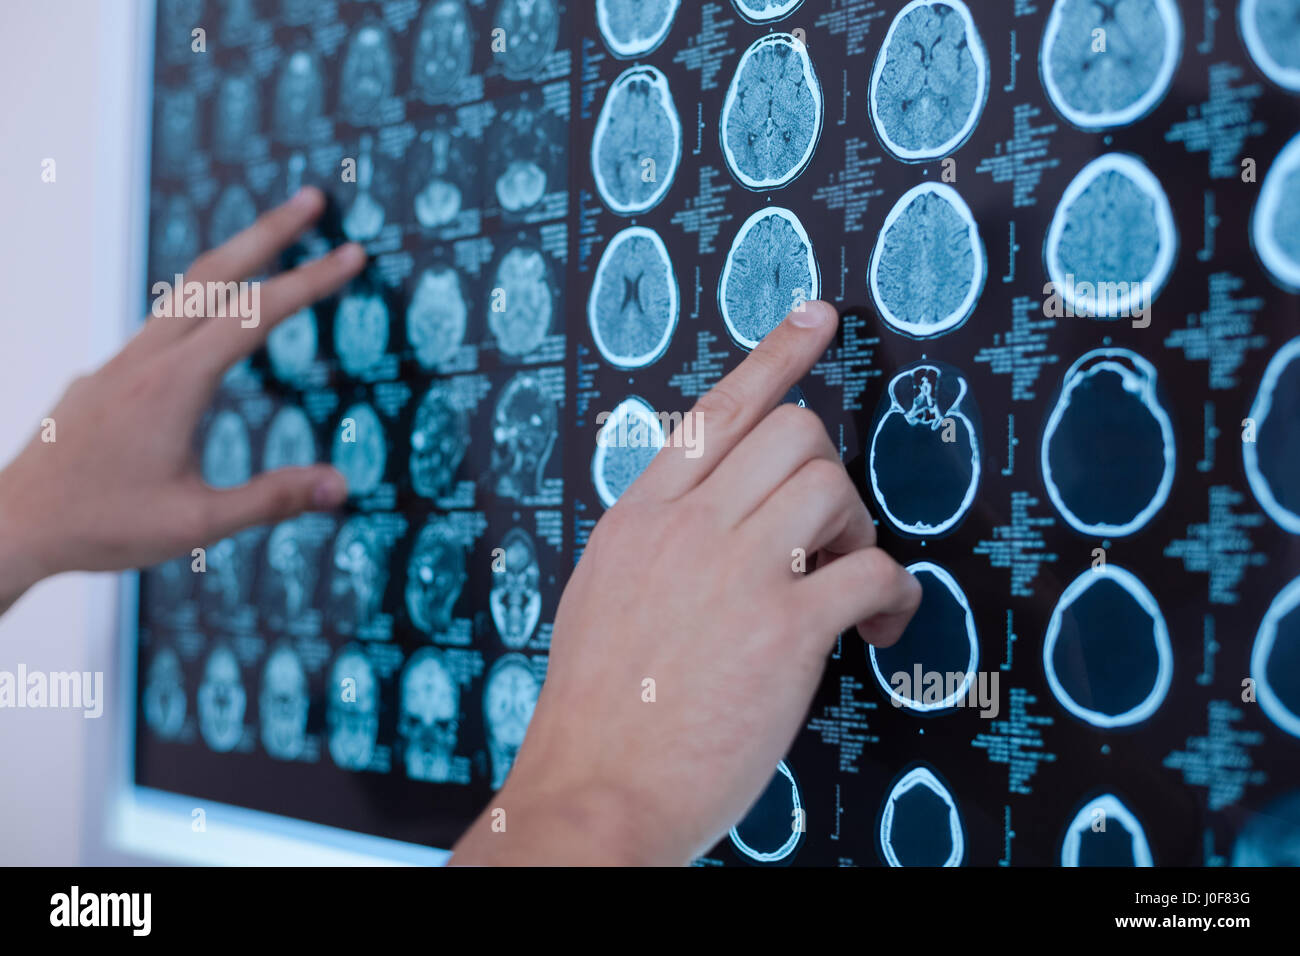 X ray images of human brain being put on the whiteboard Stock Photo